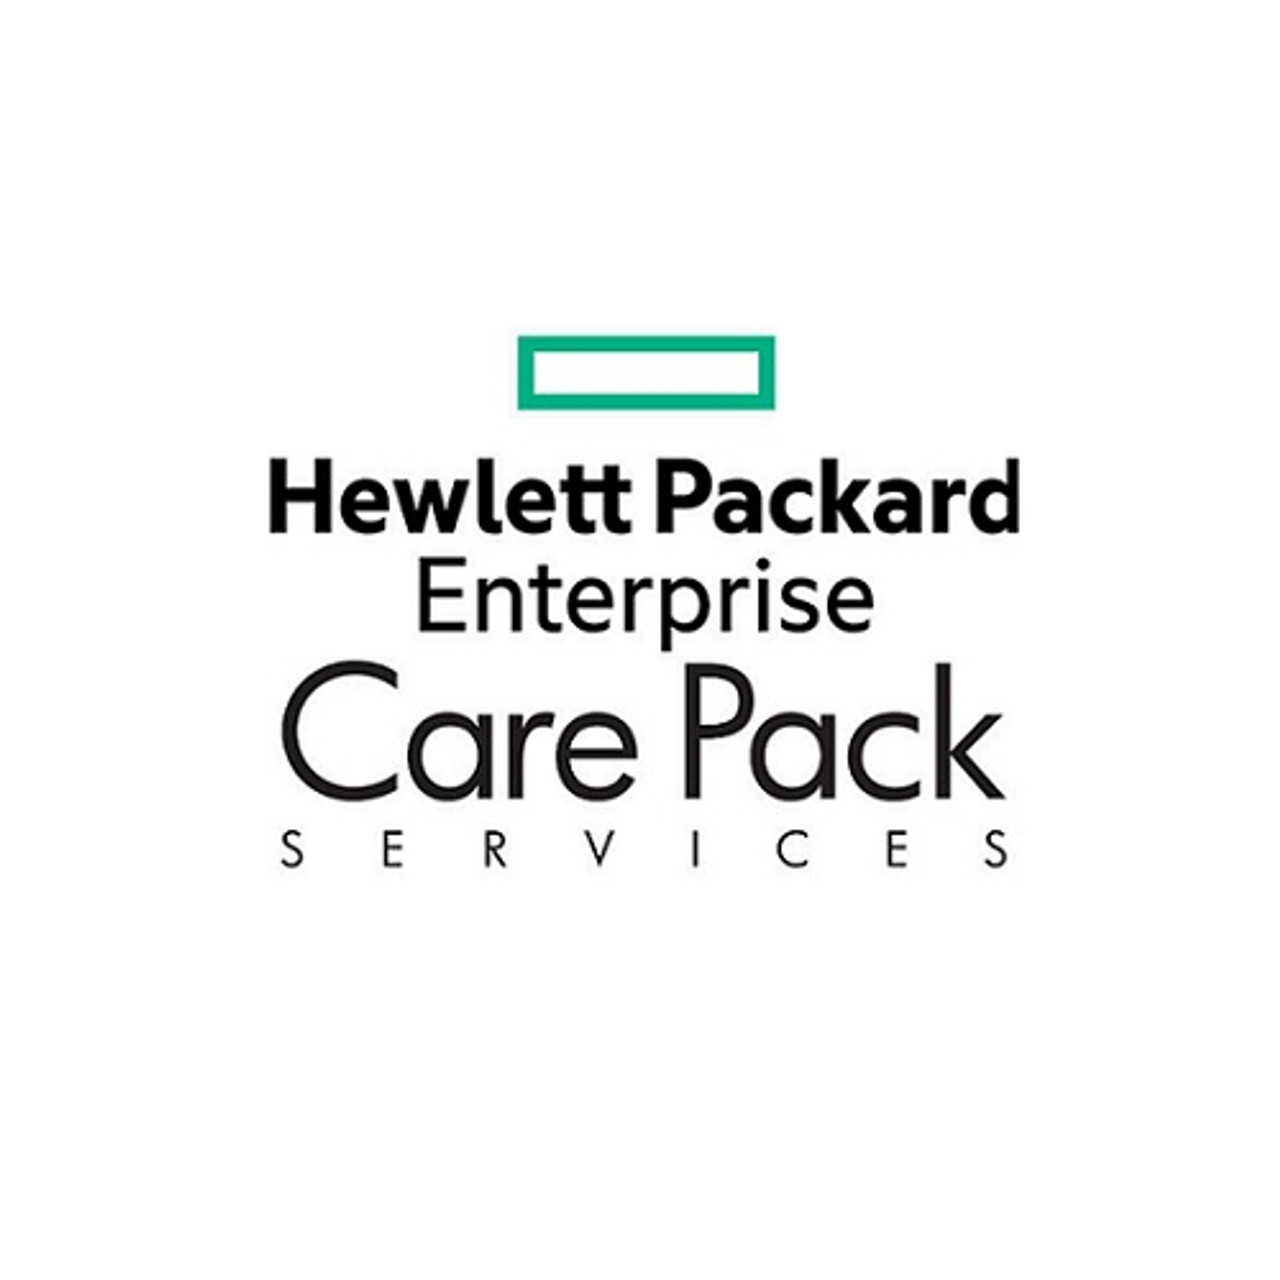 HPE Foundation SW 2 FIO Oracle